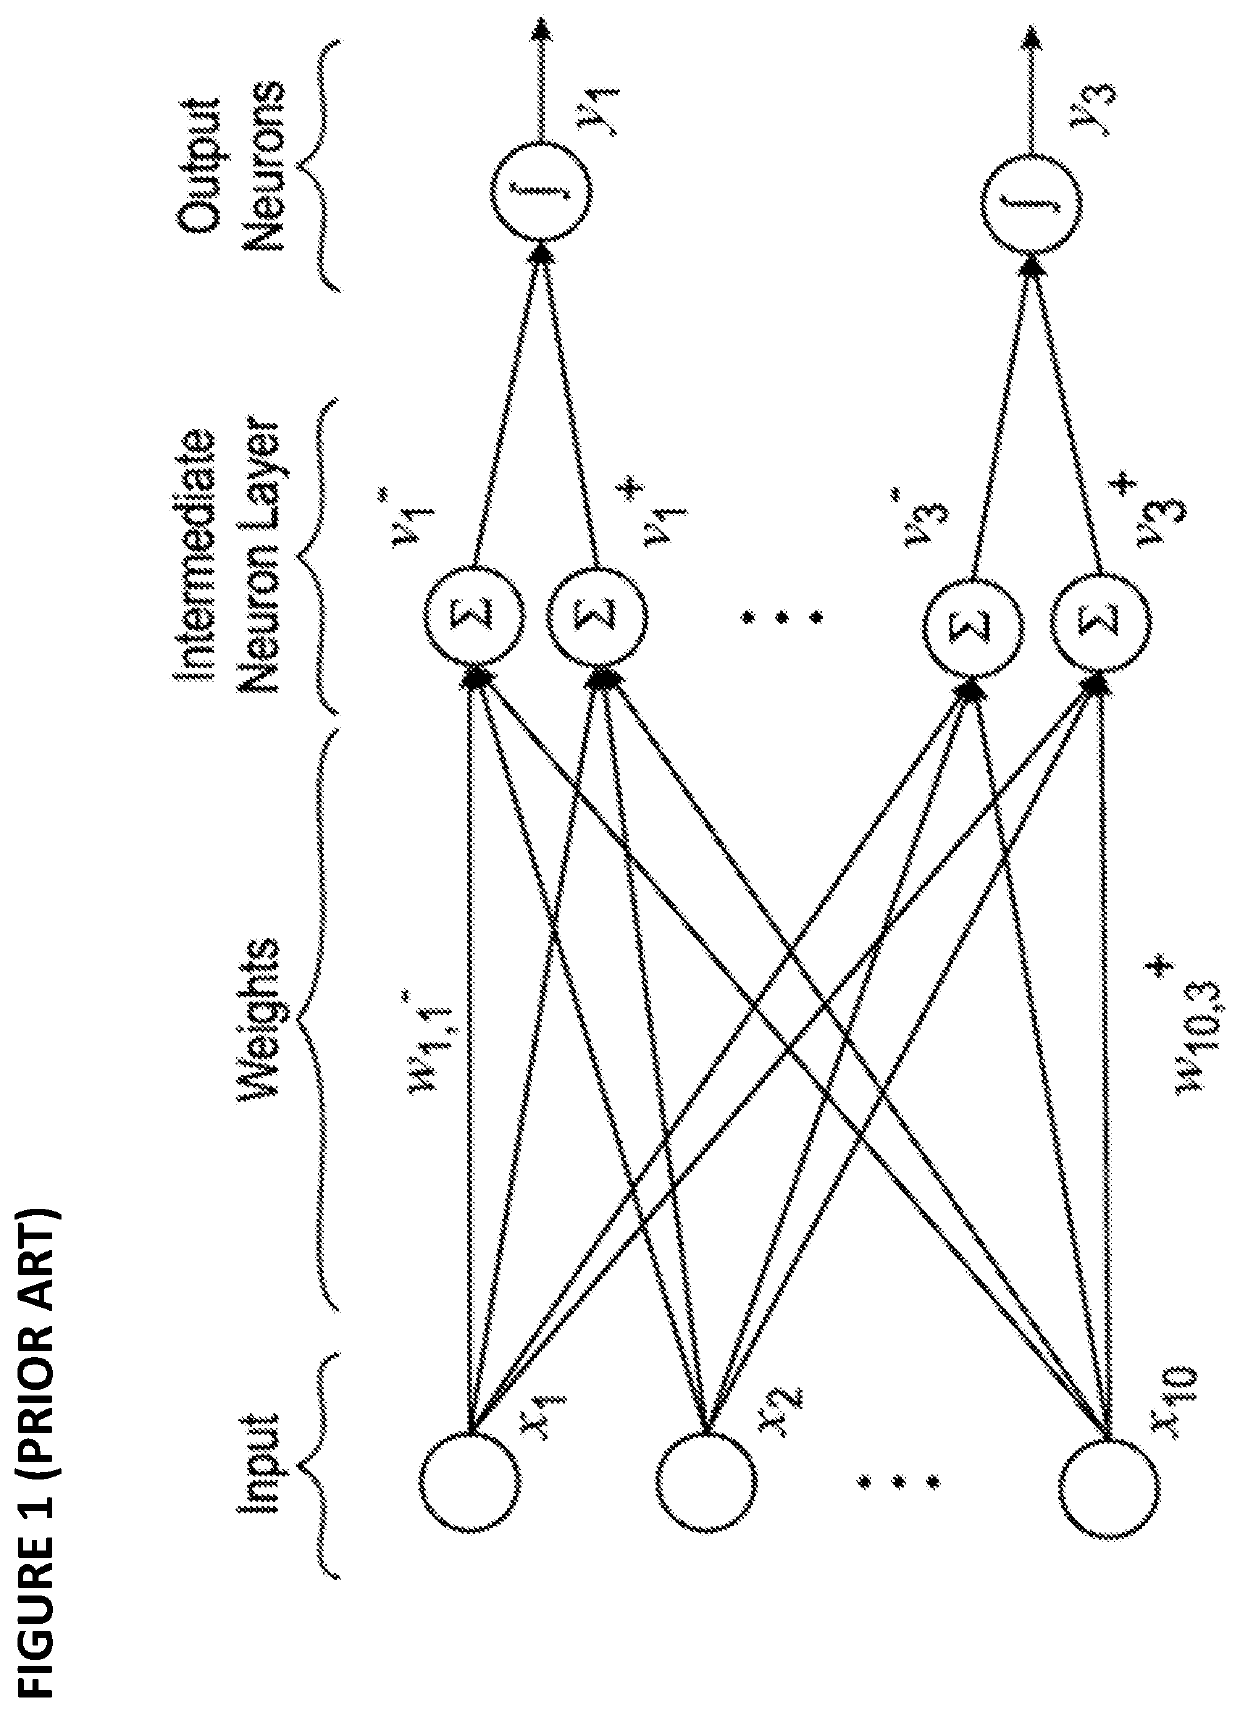 Testing circuitry and methods for analog neural memory in artificial neural network